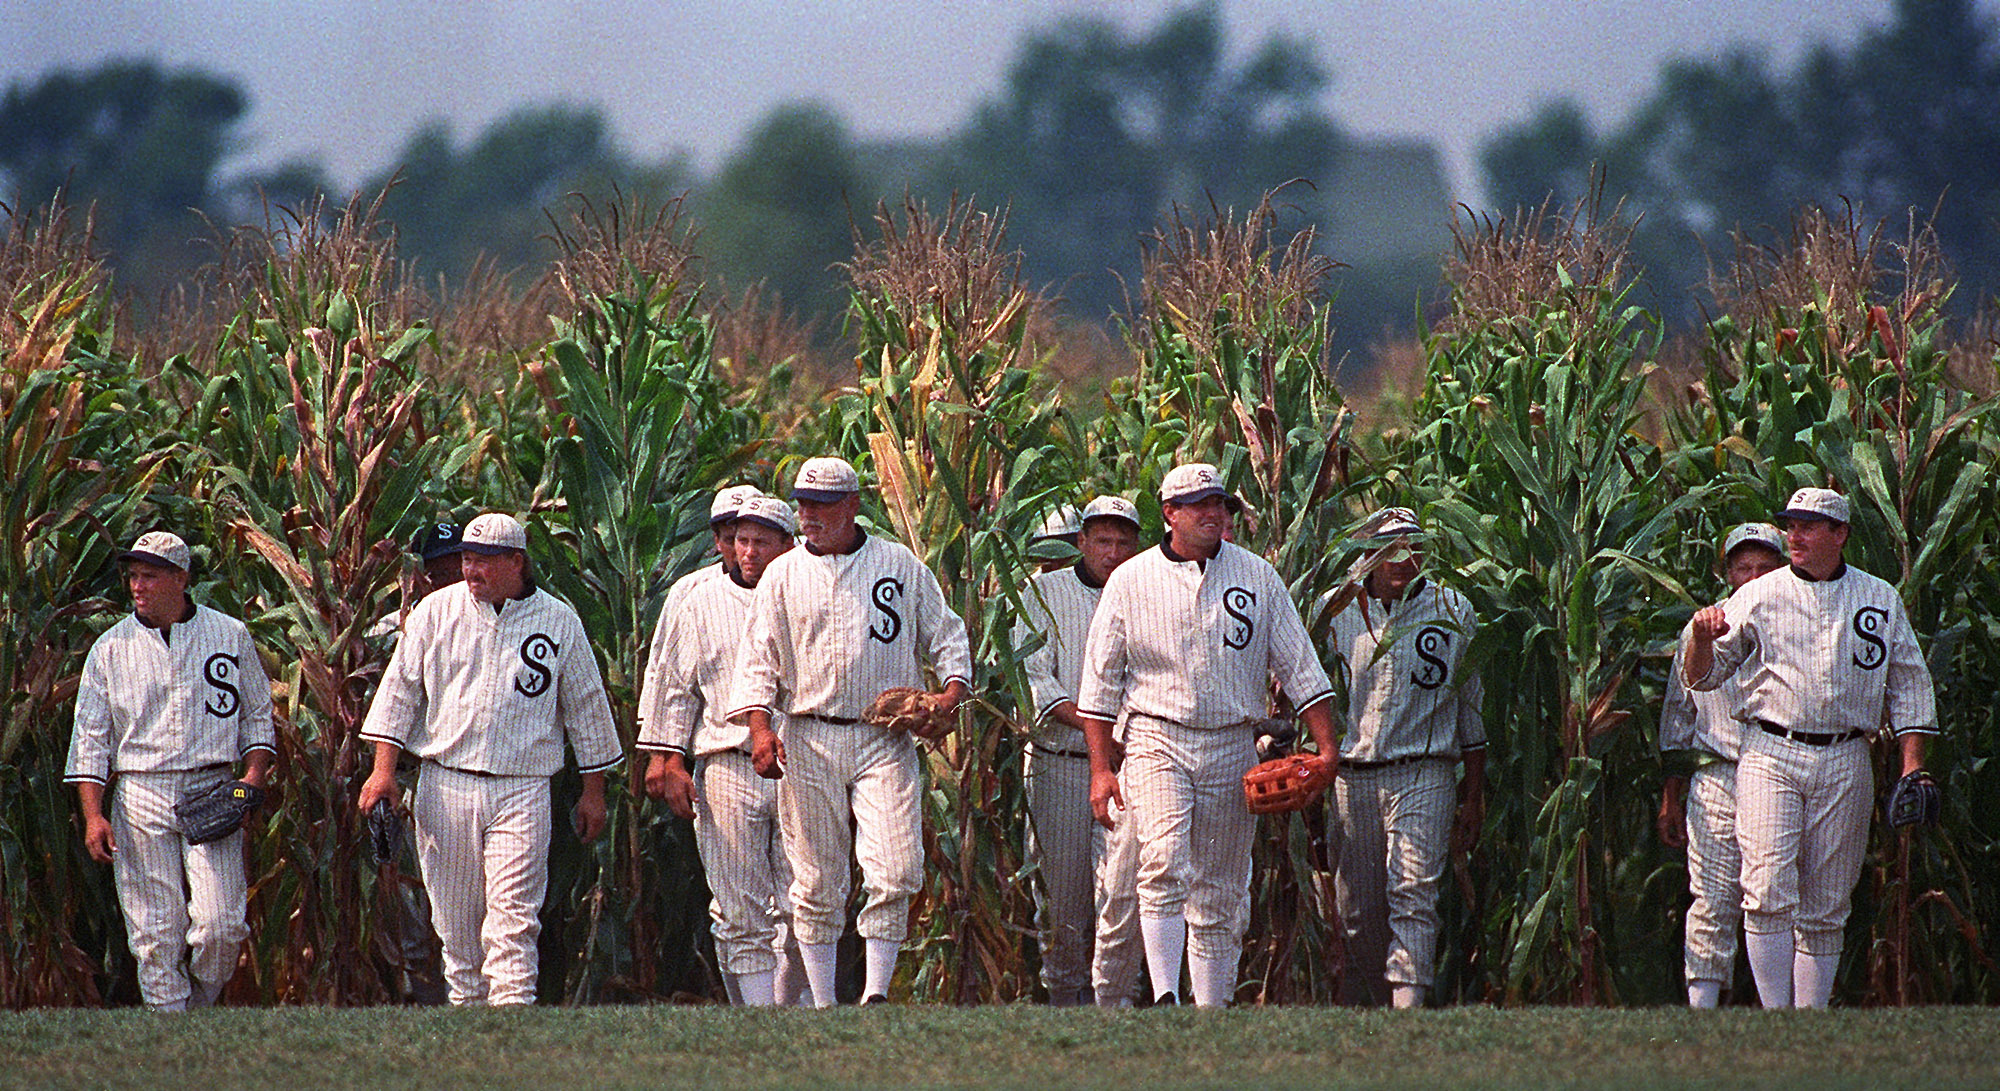 How to watch Field of Dreams game Live stream, start time, TV channel for Yankees vs